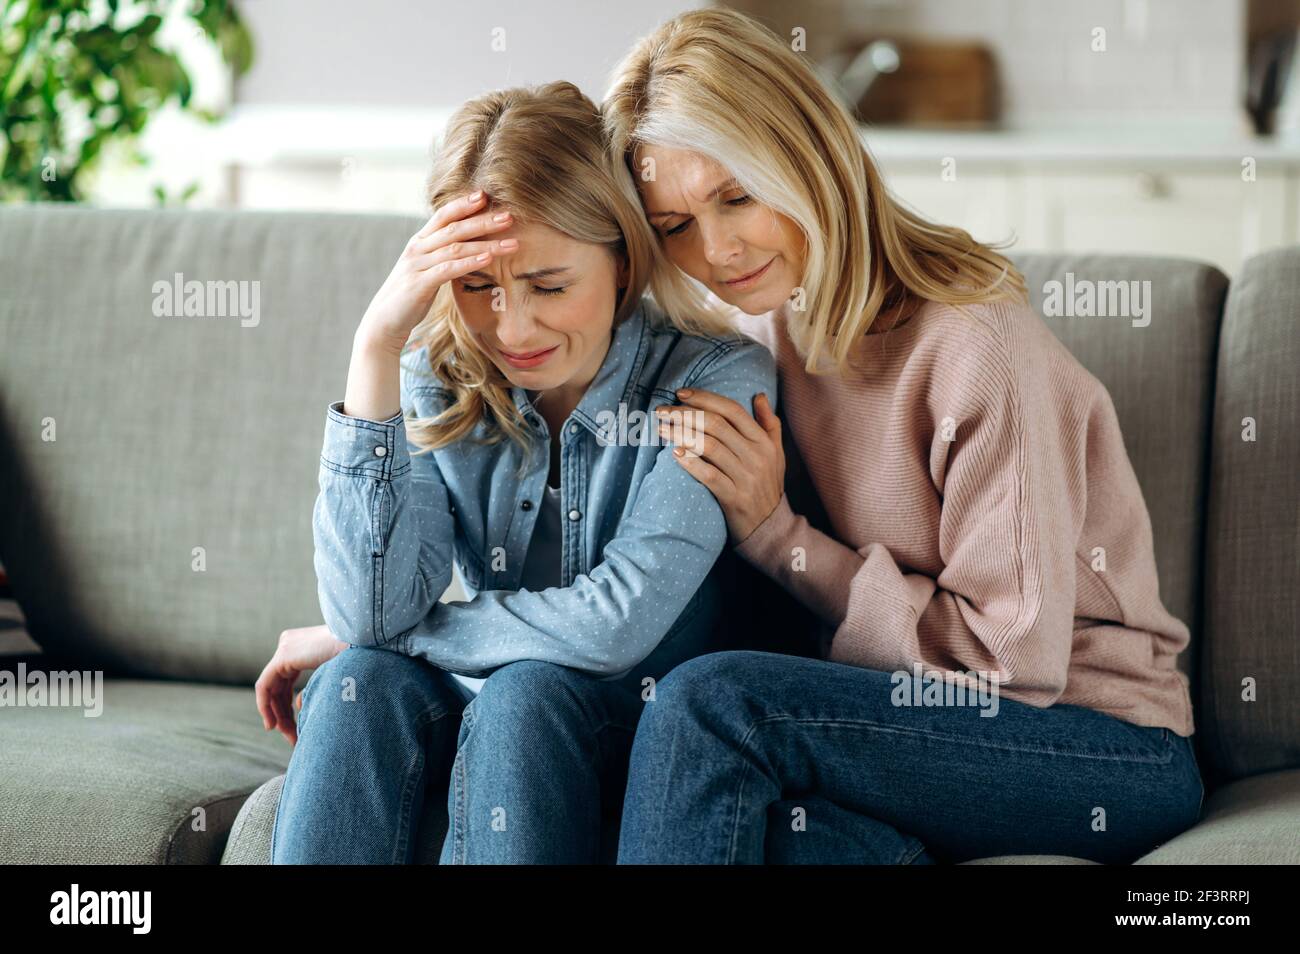 Mother and daughter together at living room. Loving mature mom sits on the couch, hugs her young adult crying daughter, stroking her, sympathizes, family relationship and values concept Stock Photo